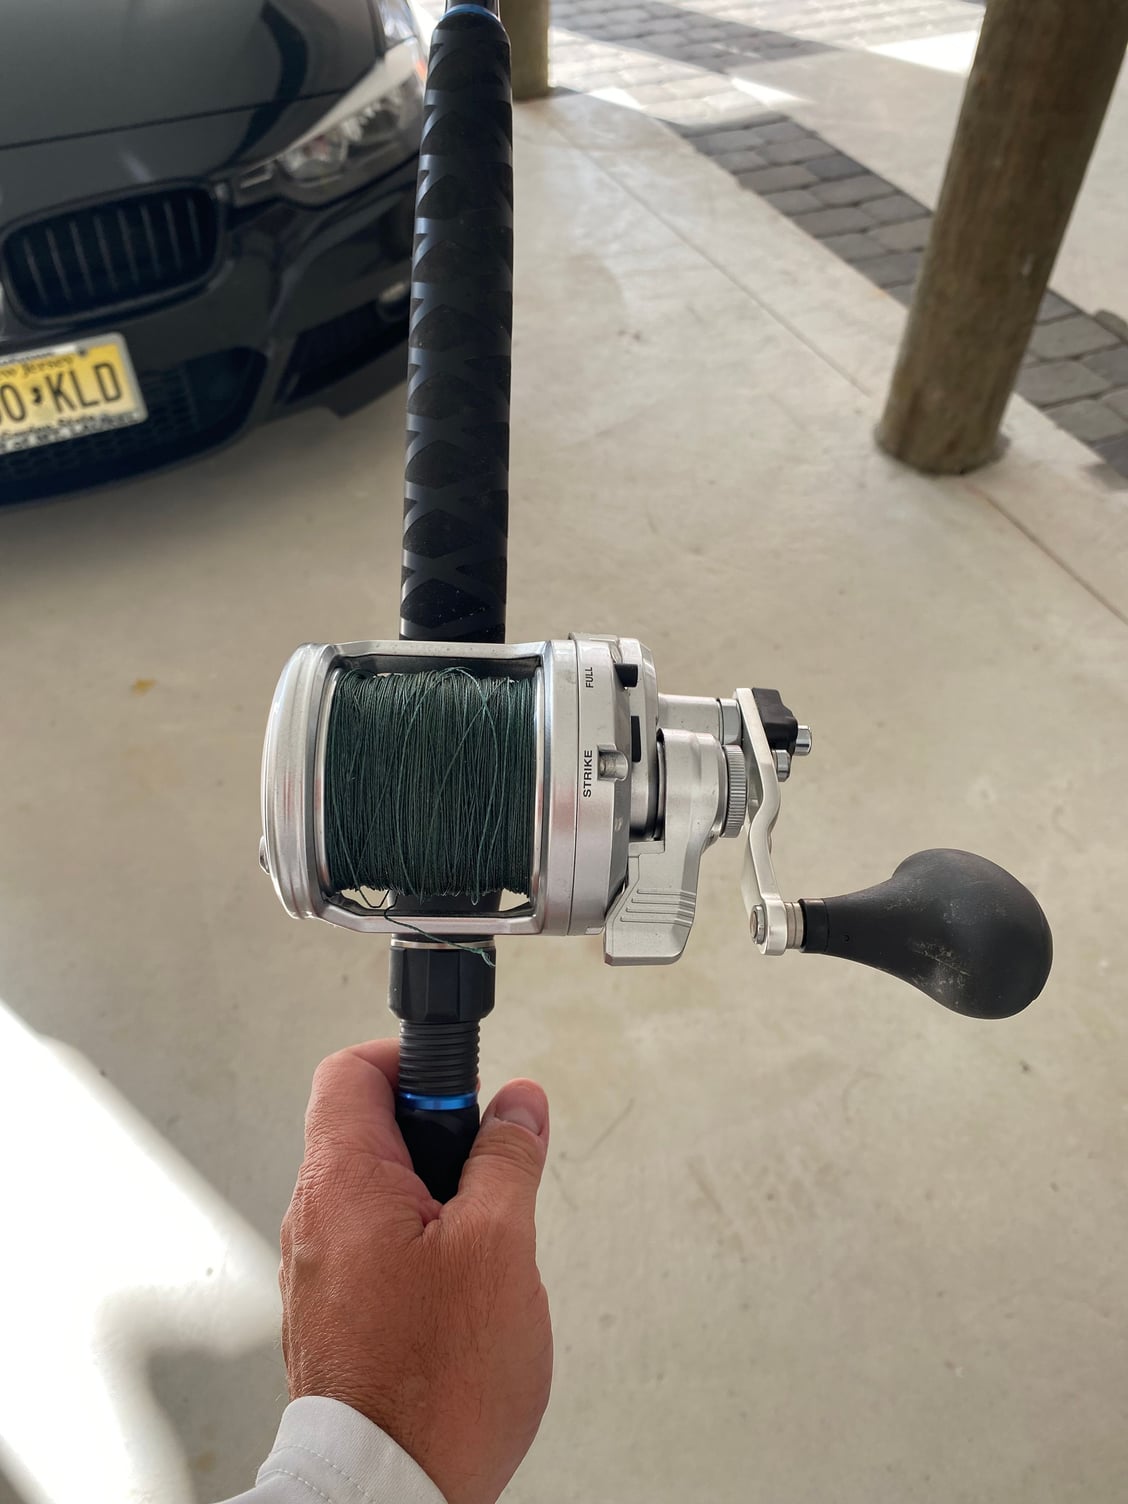 Shimano speedmaster 2 16 with braid - The Hull Truth - Boating and